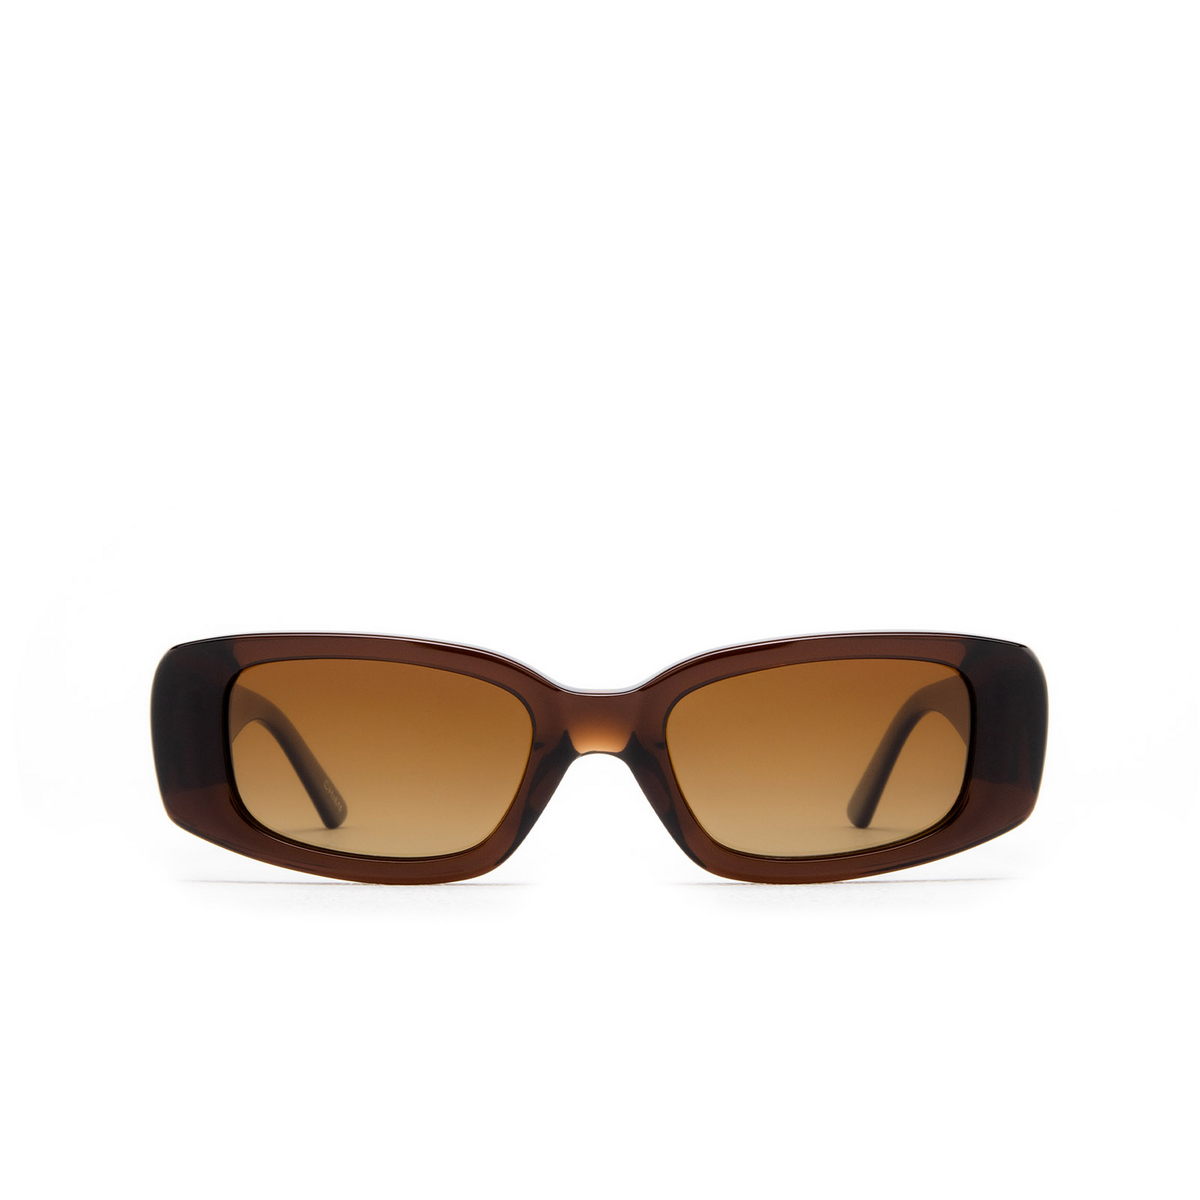 Chimi 10 Sunglasses BROWN - front view